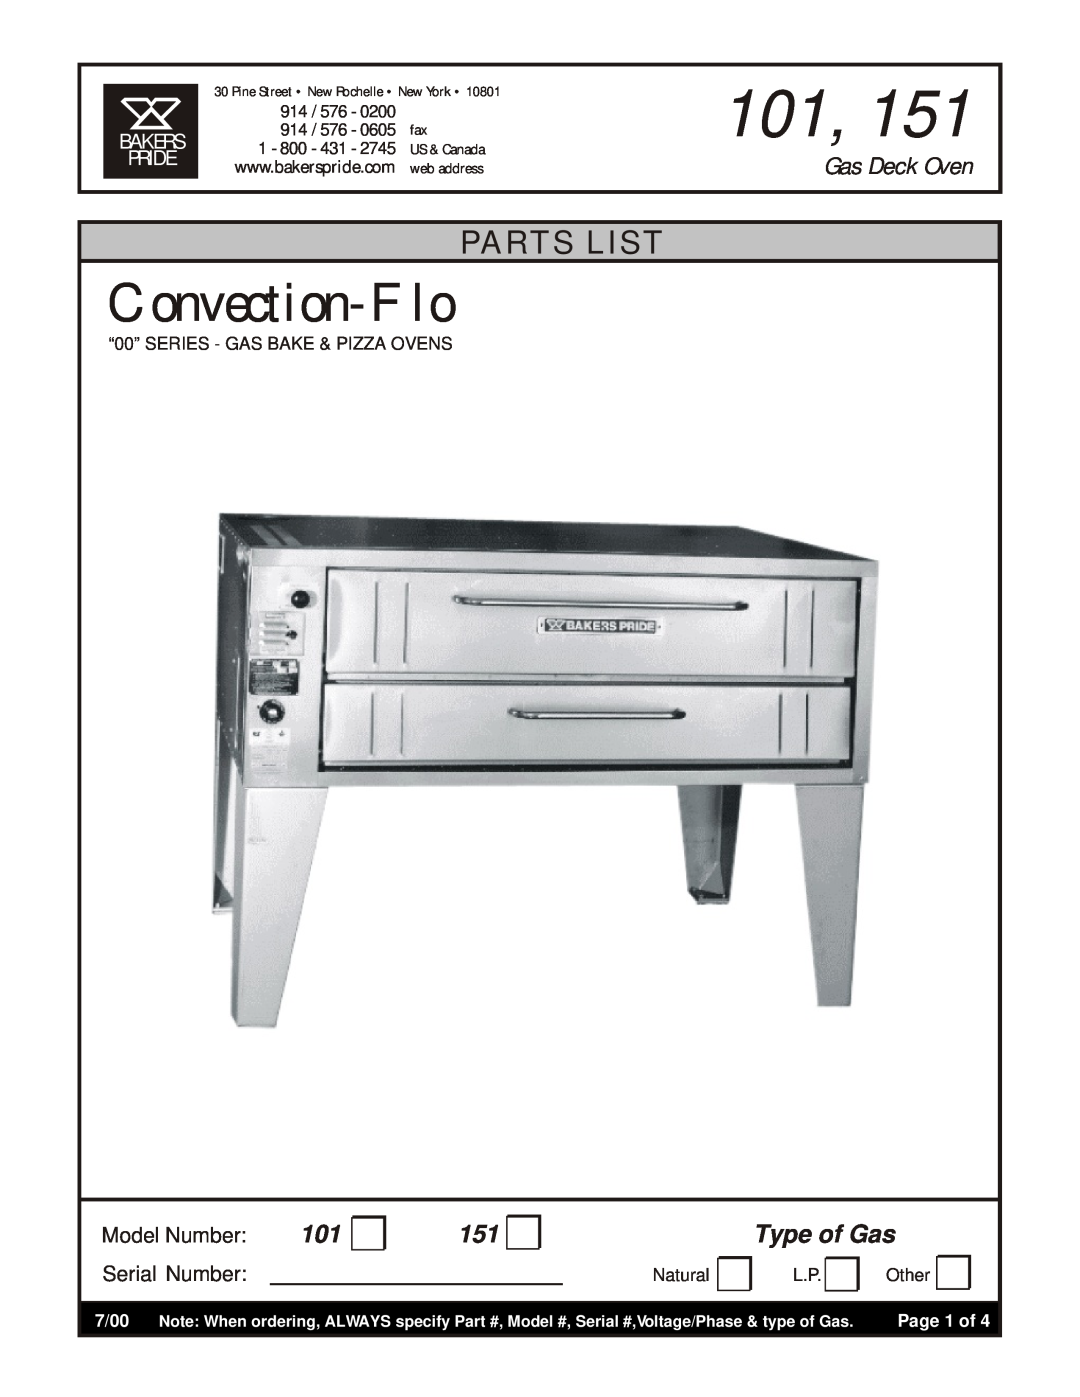 Bakers Pride Oven 151 manual Type of Gas, Bakers, Convection-Flo, Parts List, Model Number, Serial Number, Natural, Other 